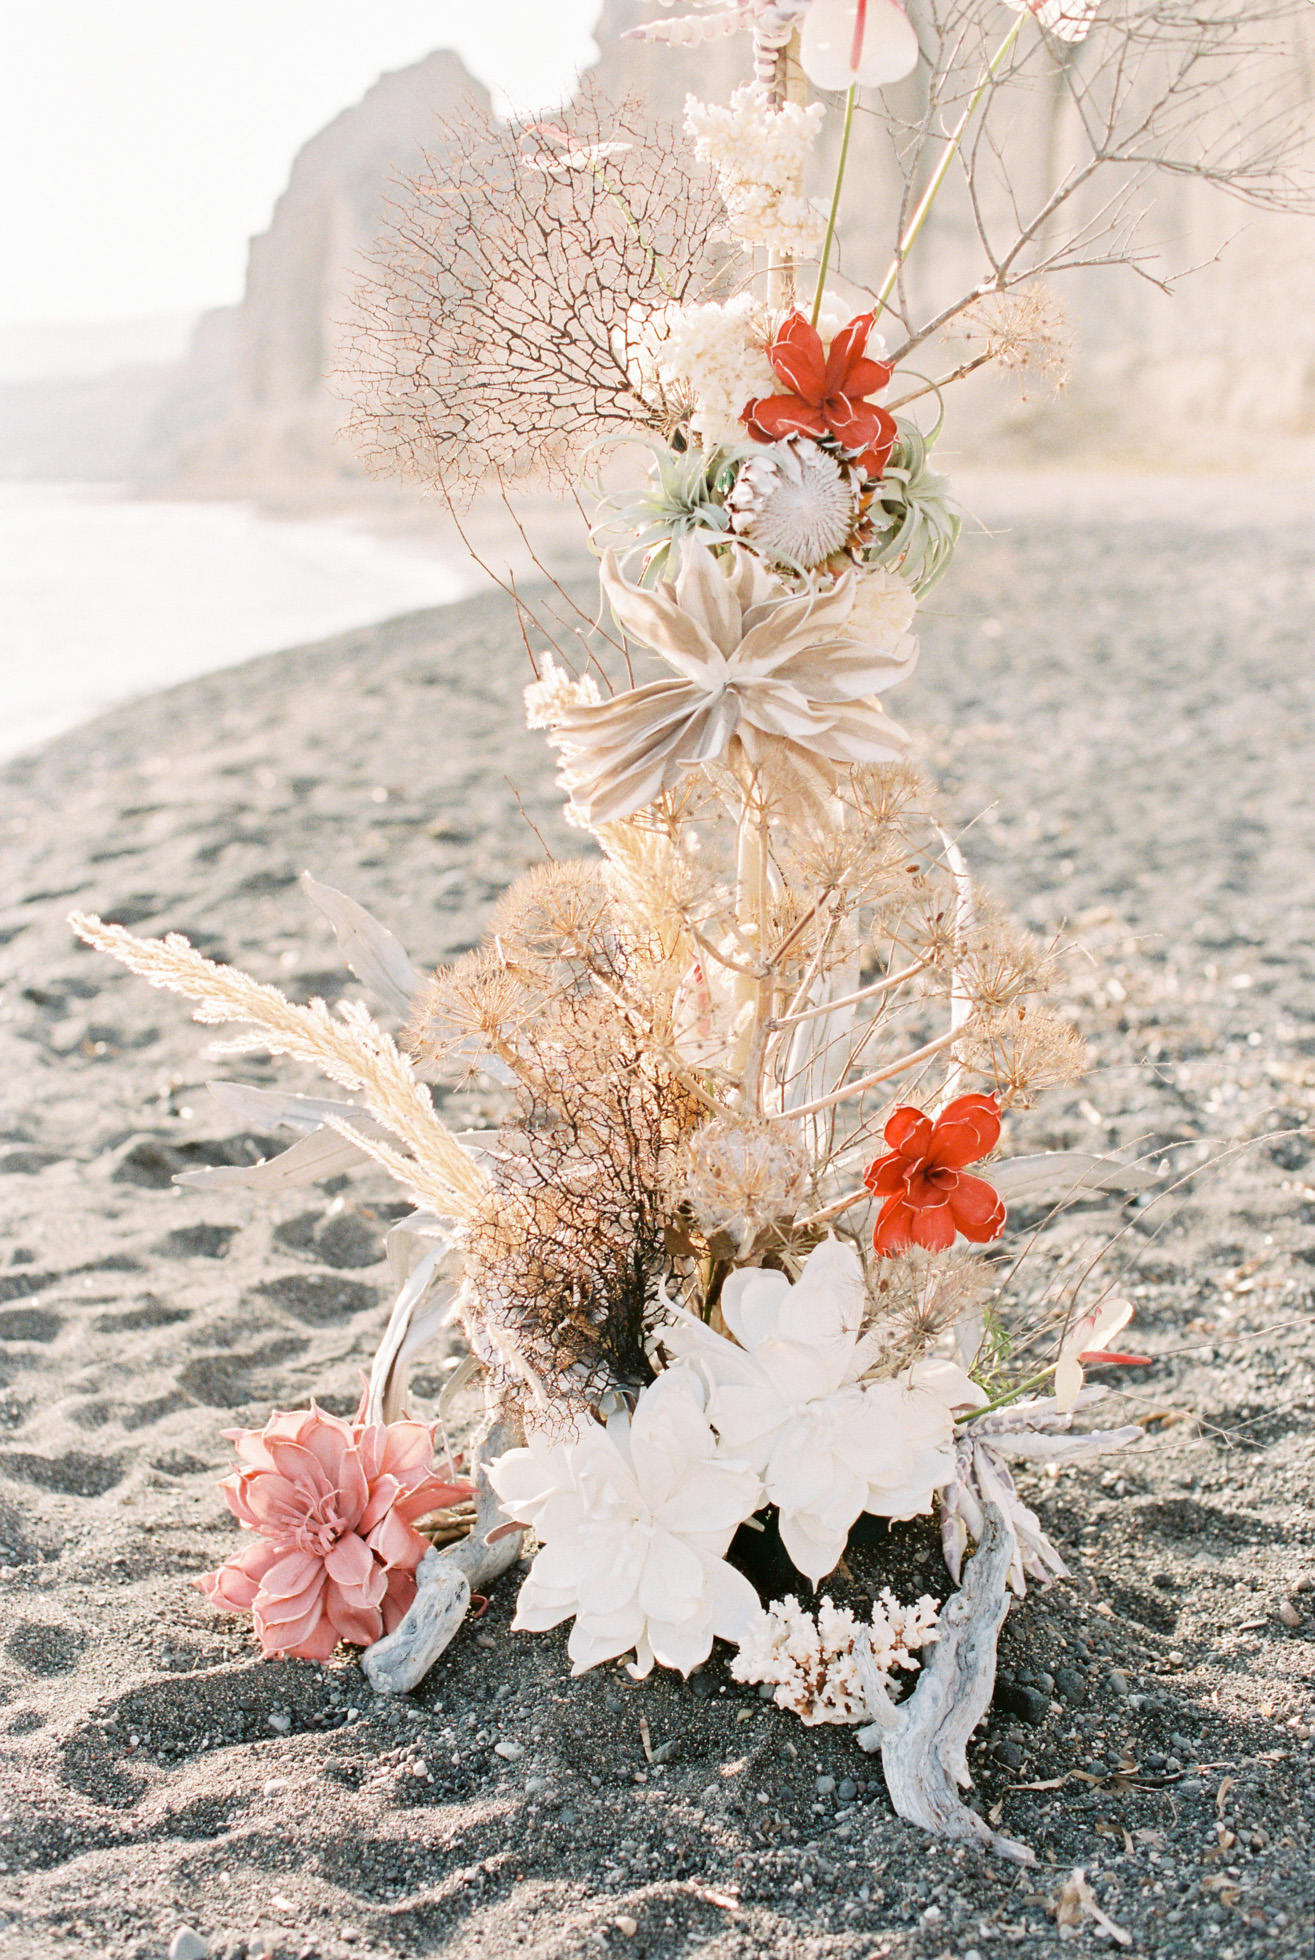 Unique ocean-inspired wedding canopy and ceremony setup at a beach wedding inspiration shoot in Santorini Greece.